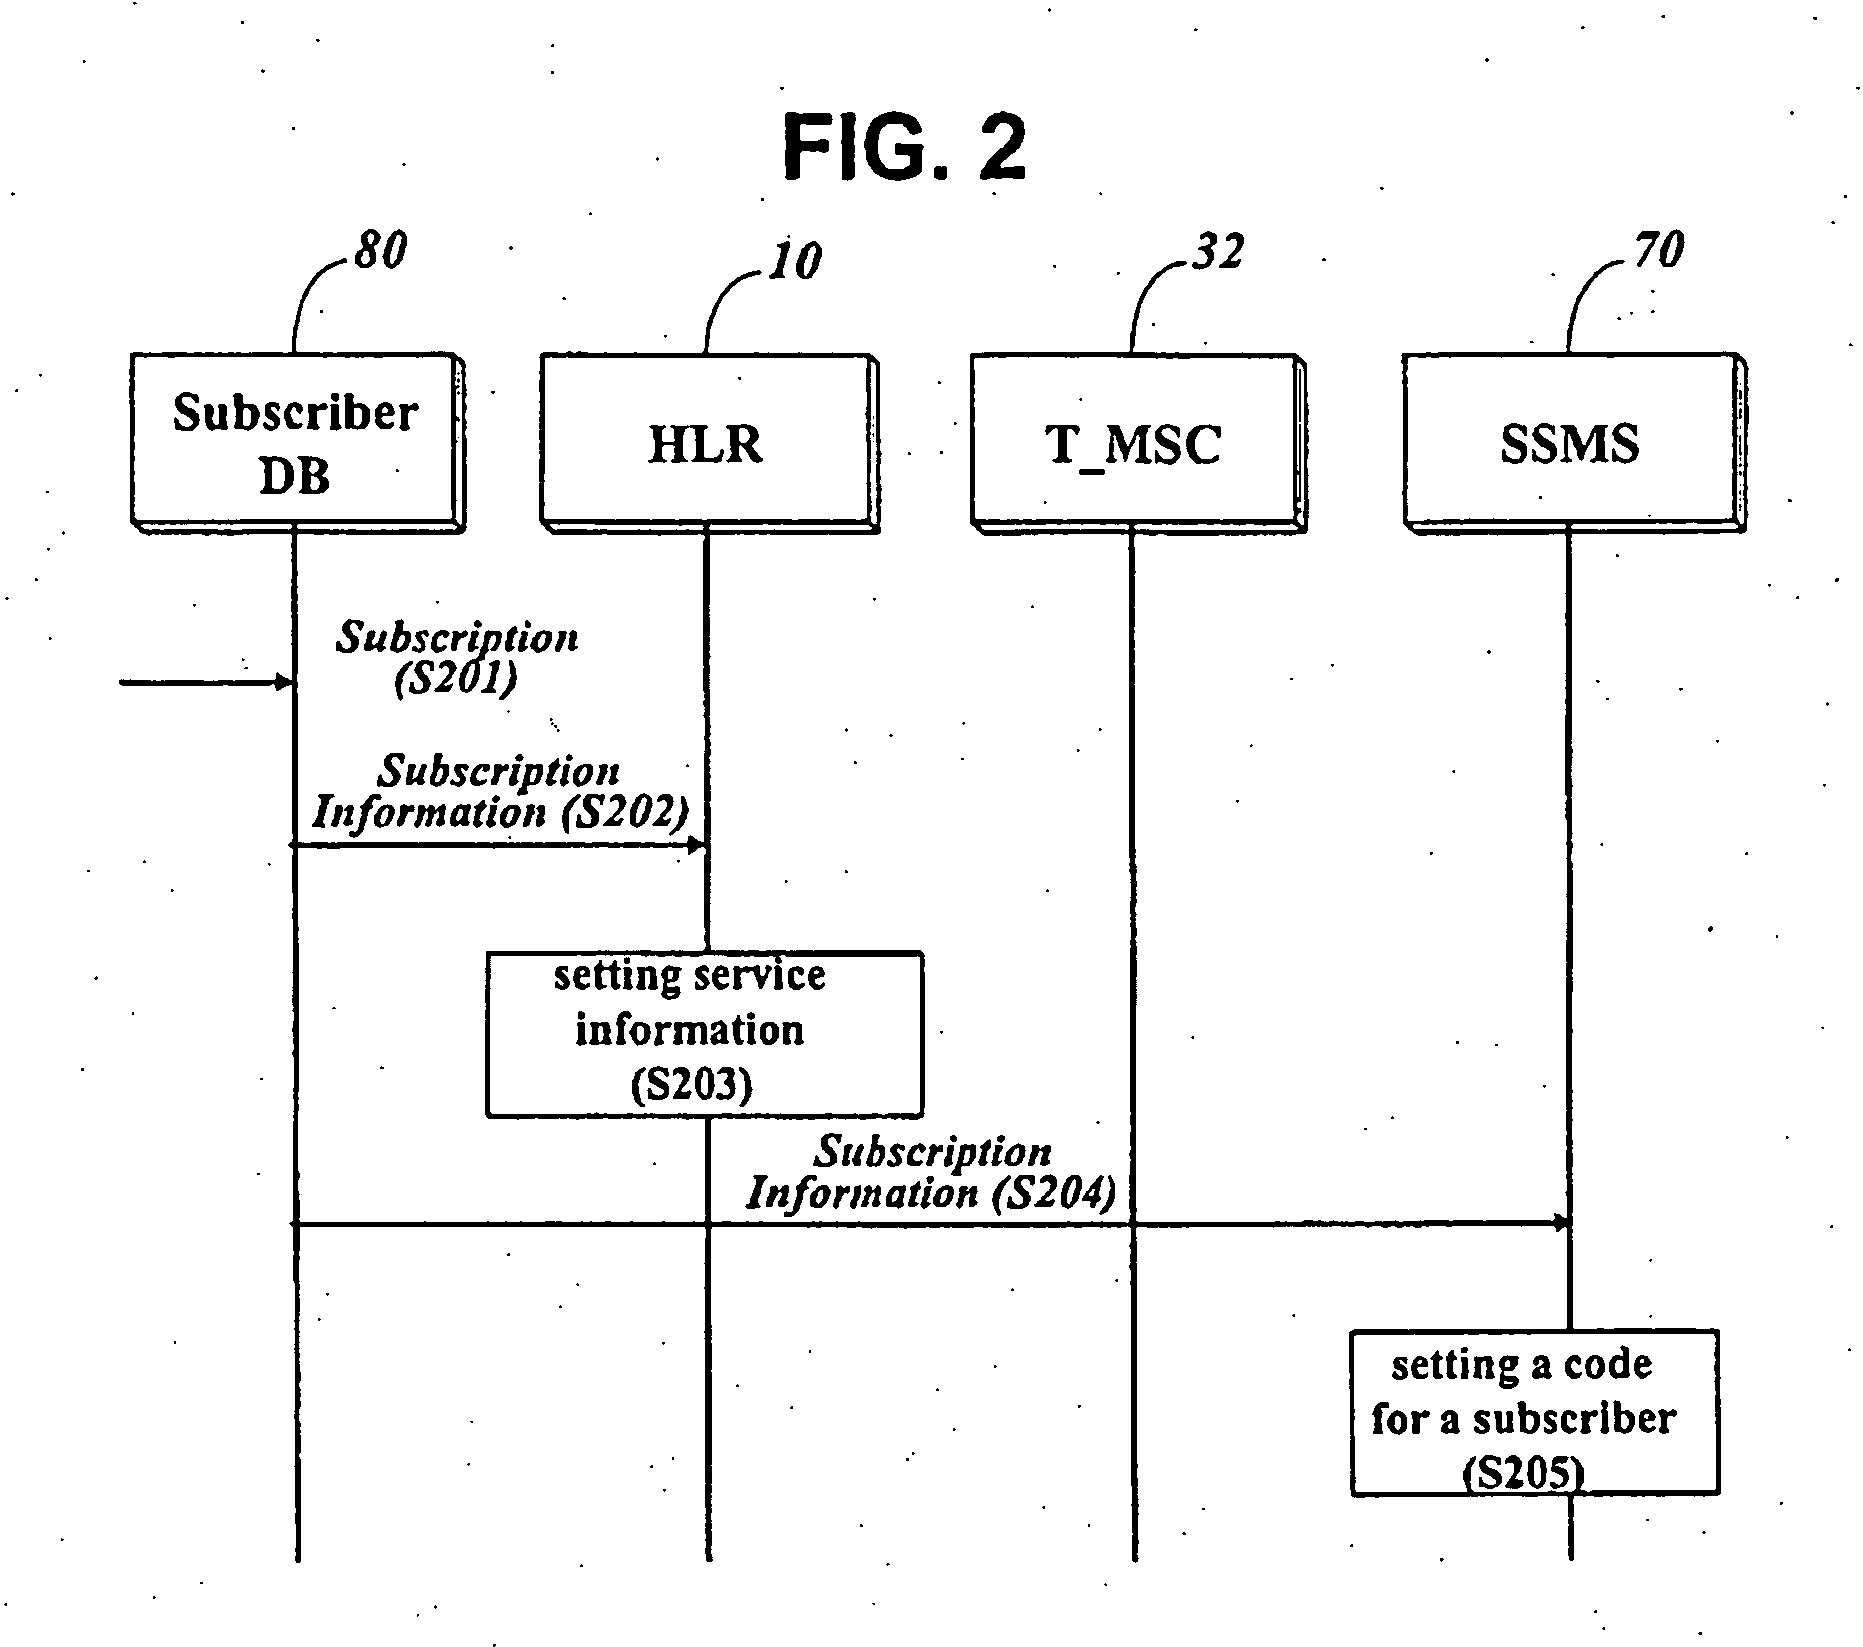 Method for providing a subscriber-based ringback tone sound stored in a mobile exchanger